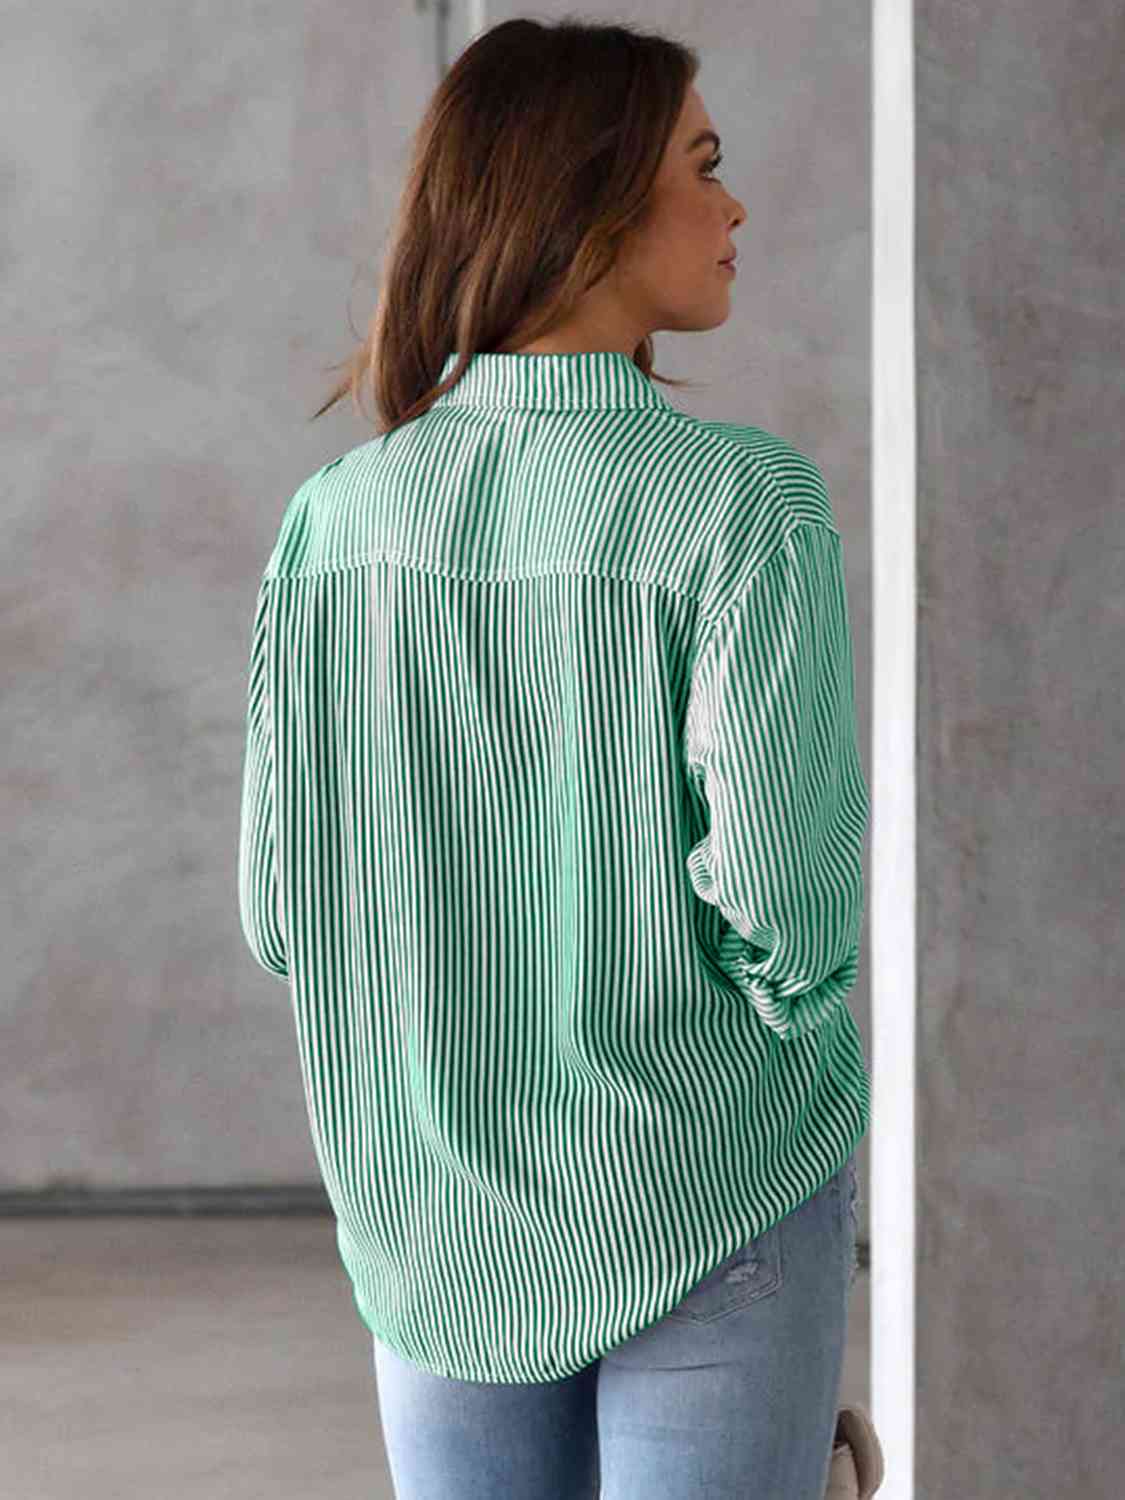 Striped Collared Neck Shirt with Pocket (5 Colors)  Krazy Heart Designs Boutique   